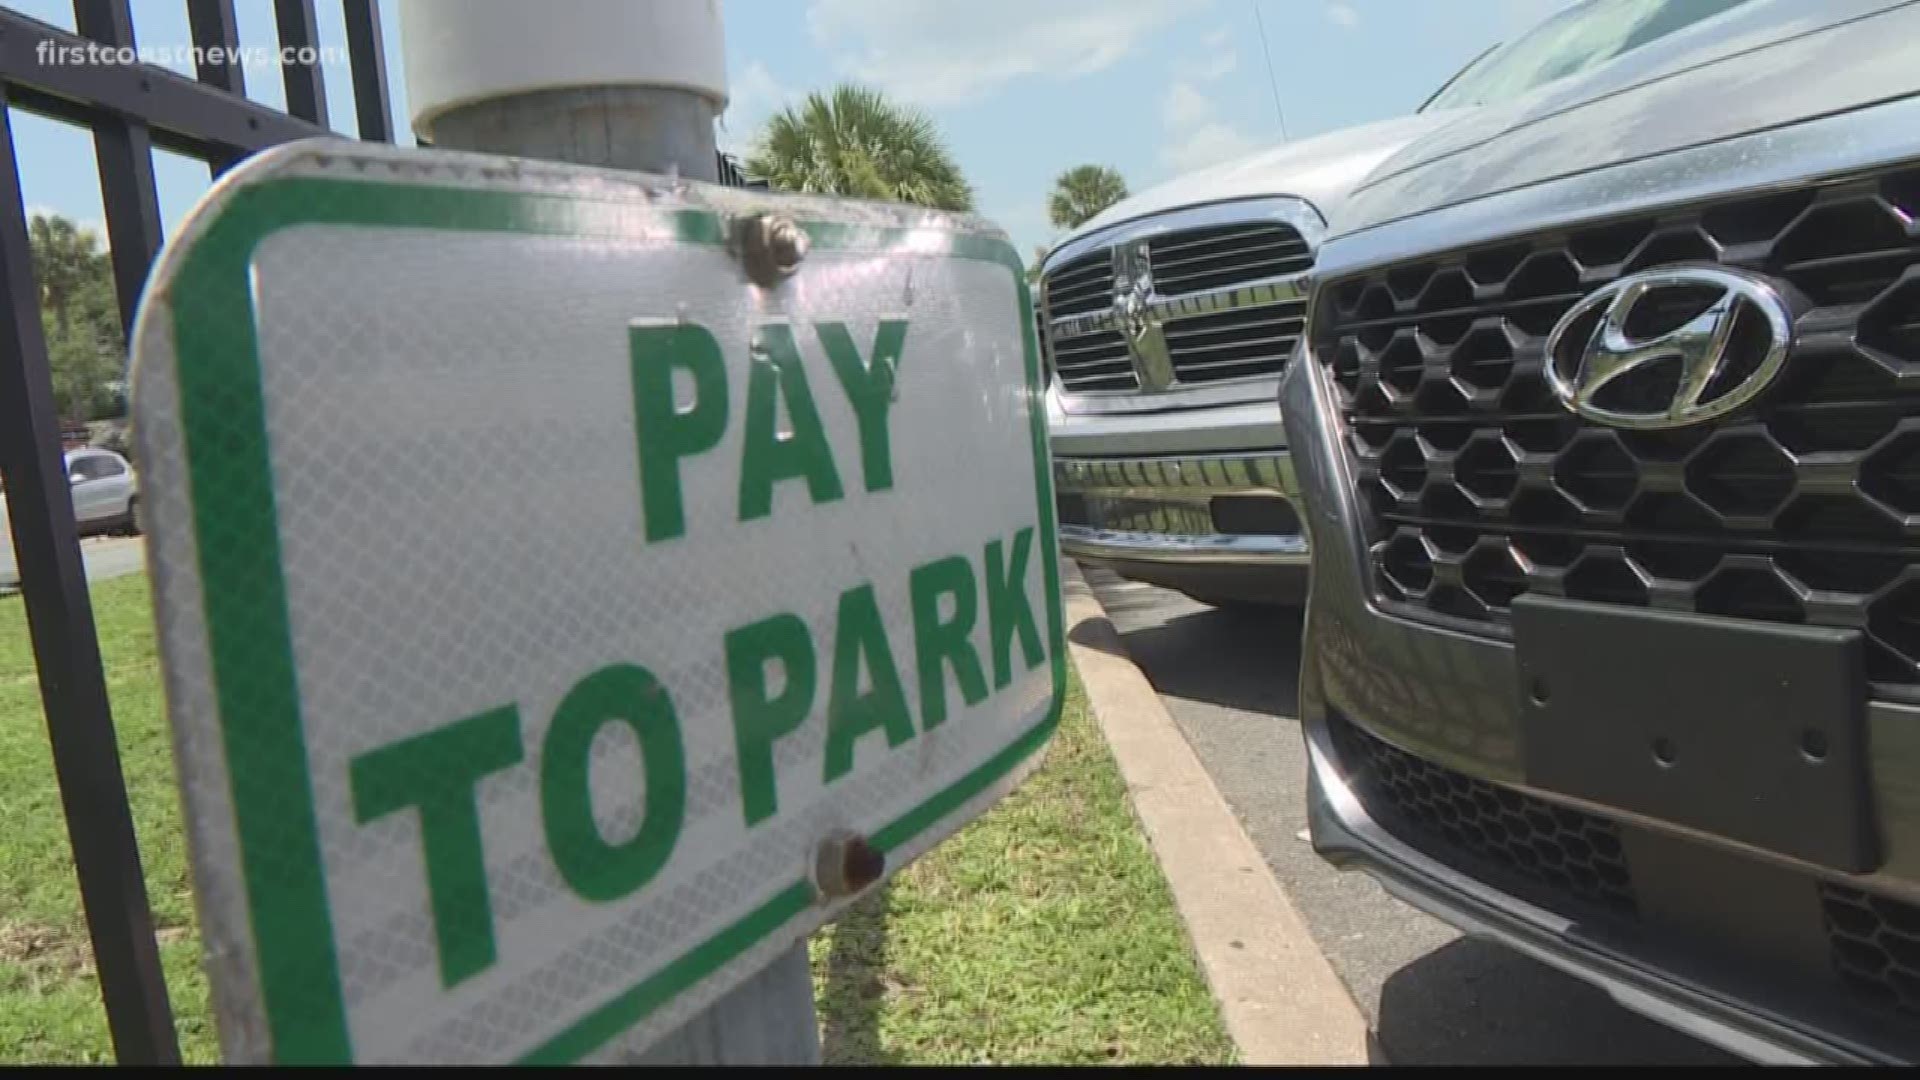 Parking in St. Augustine is just hard. Now the city is actually considering dropping its parking prices at the garage.